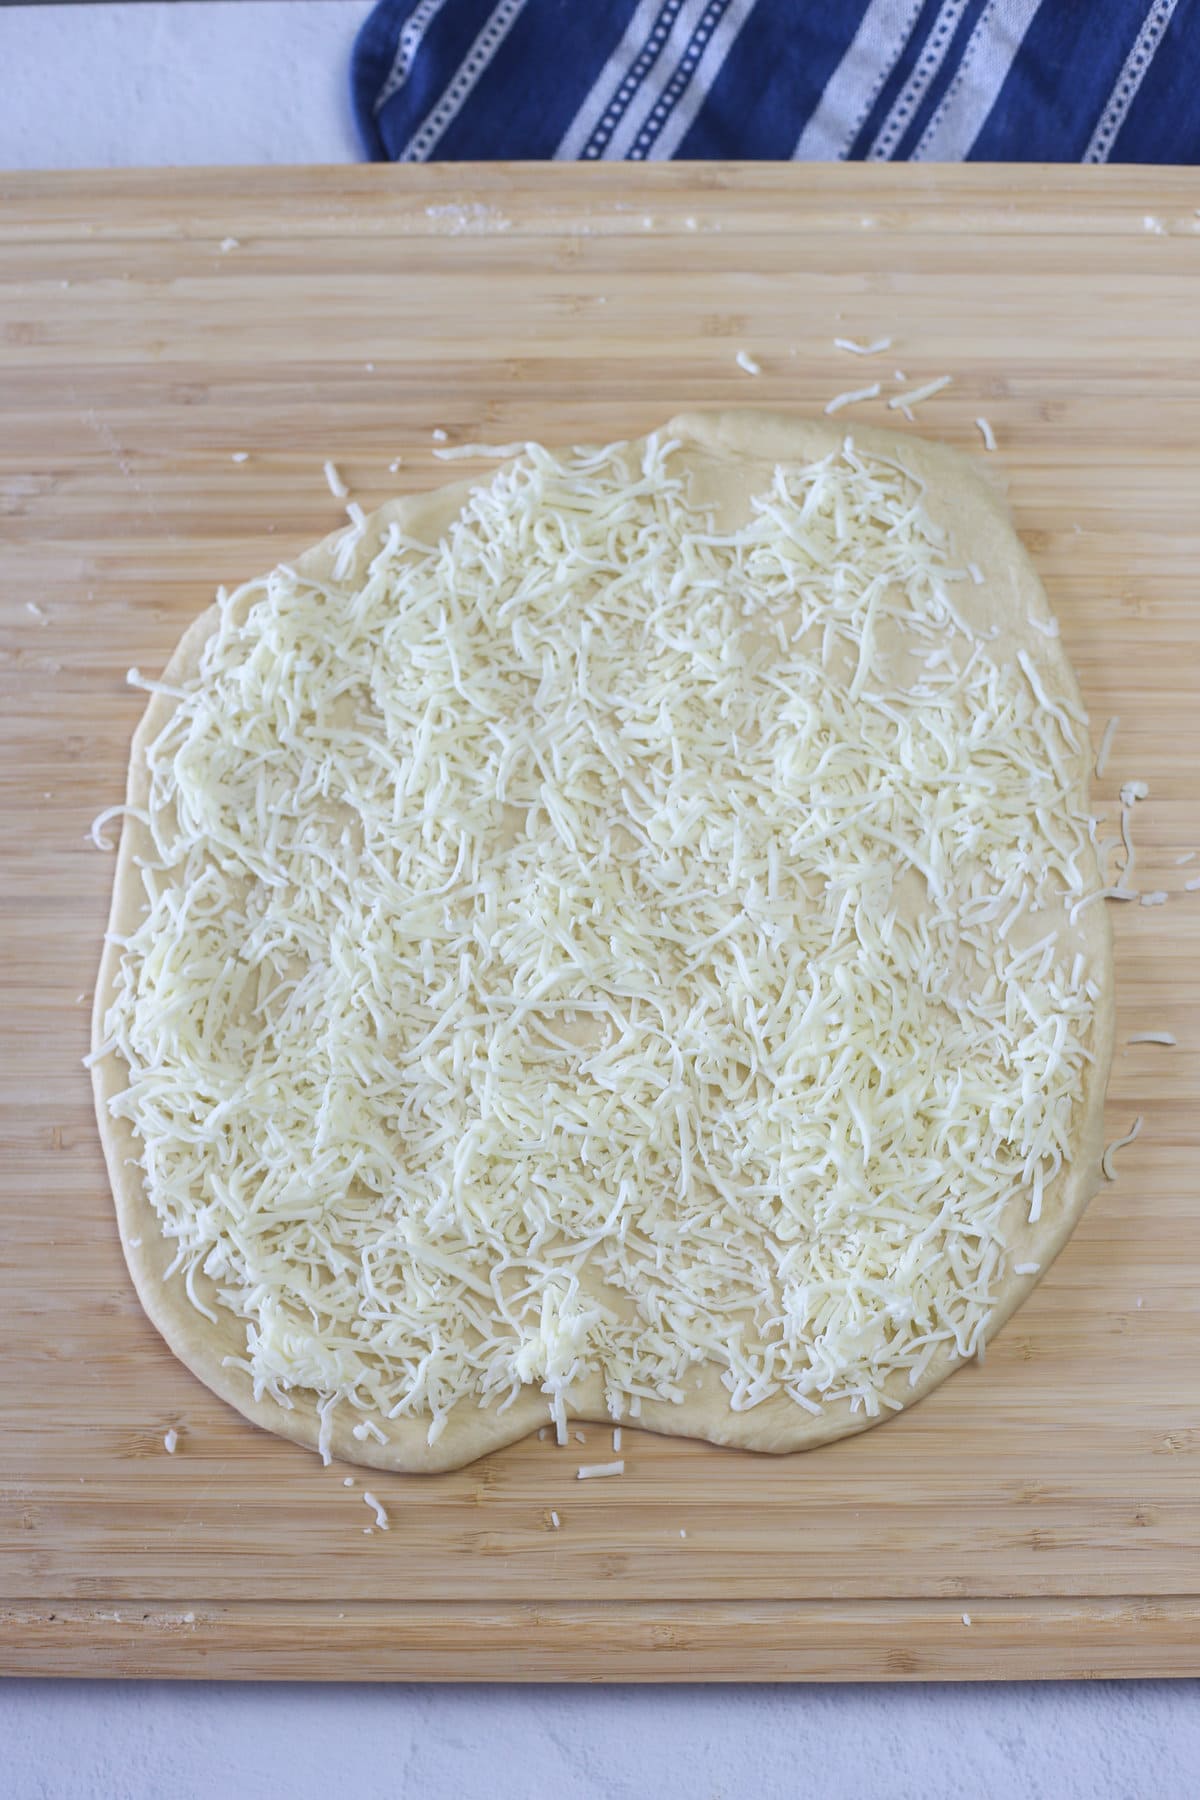 Shredded cheese on top of rolled out dough.